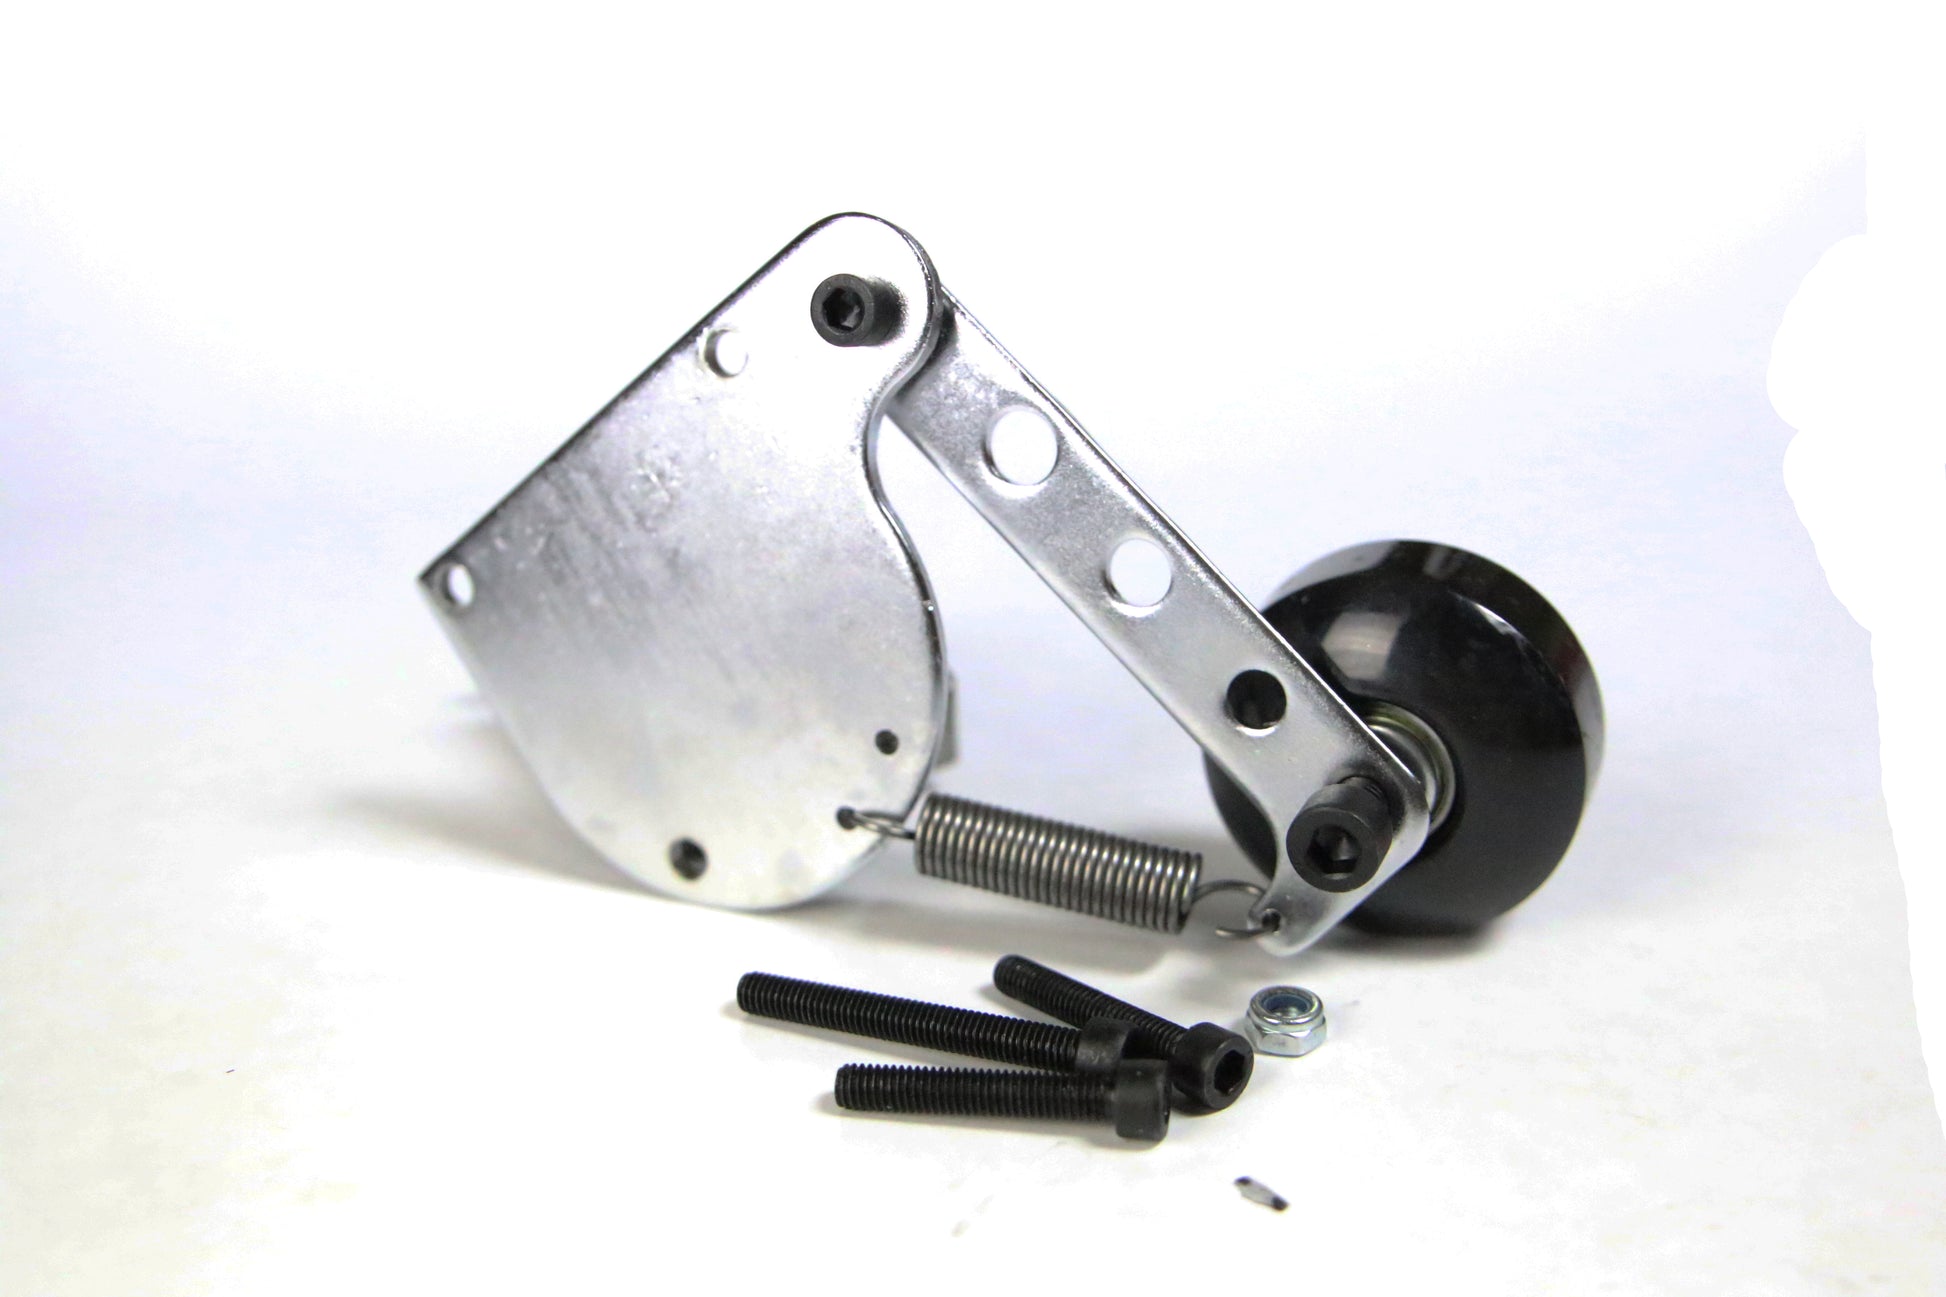 Easy Performance chain tensioner for Motorized Bicycle with 2 stroke Motor